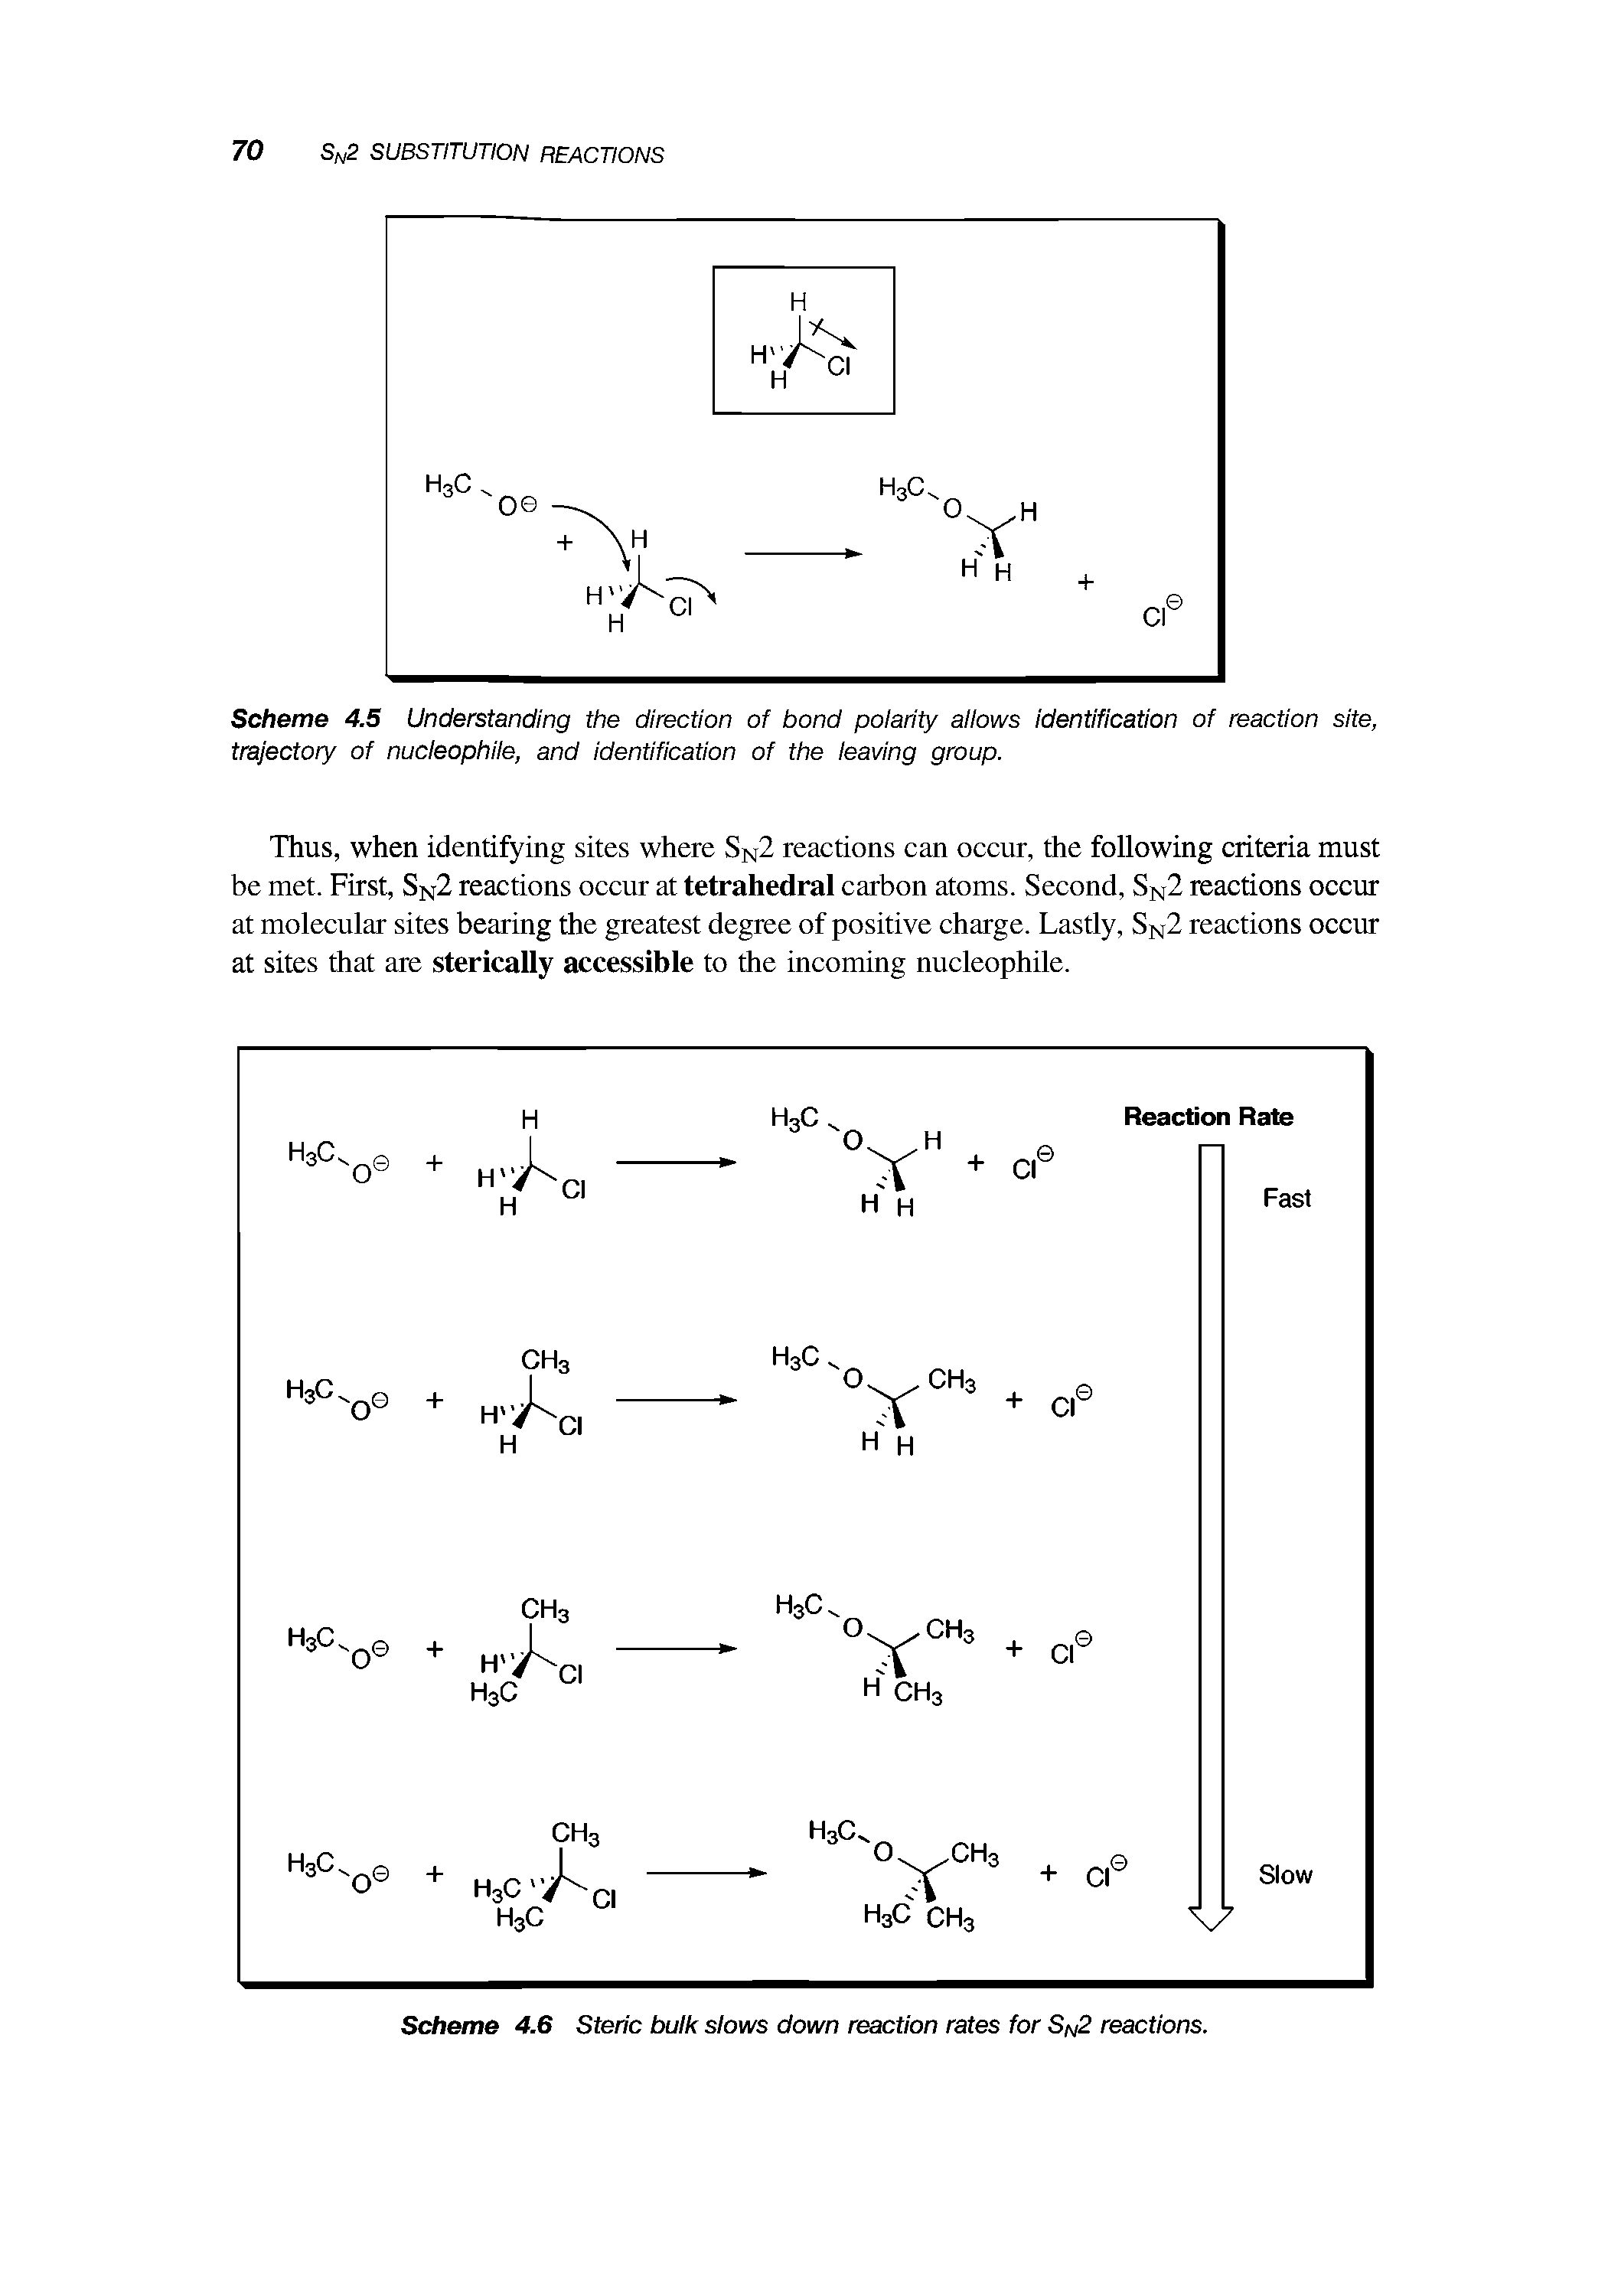 Scheme 4.5 Understanding the direction of bond polarity allows identification of reaction site, trajectory of nucleophile, and identification of the leaving group.